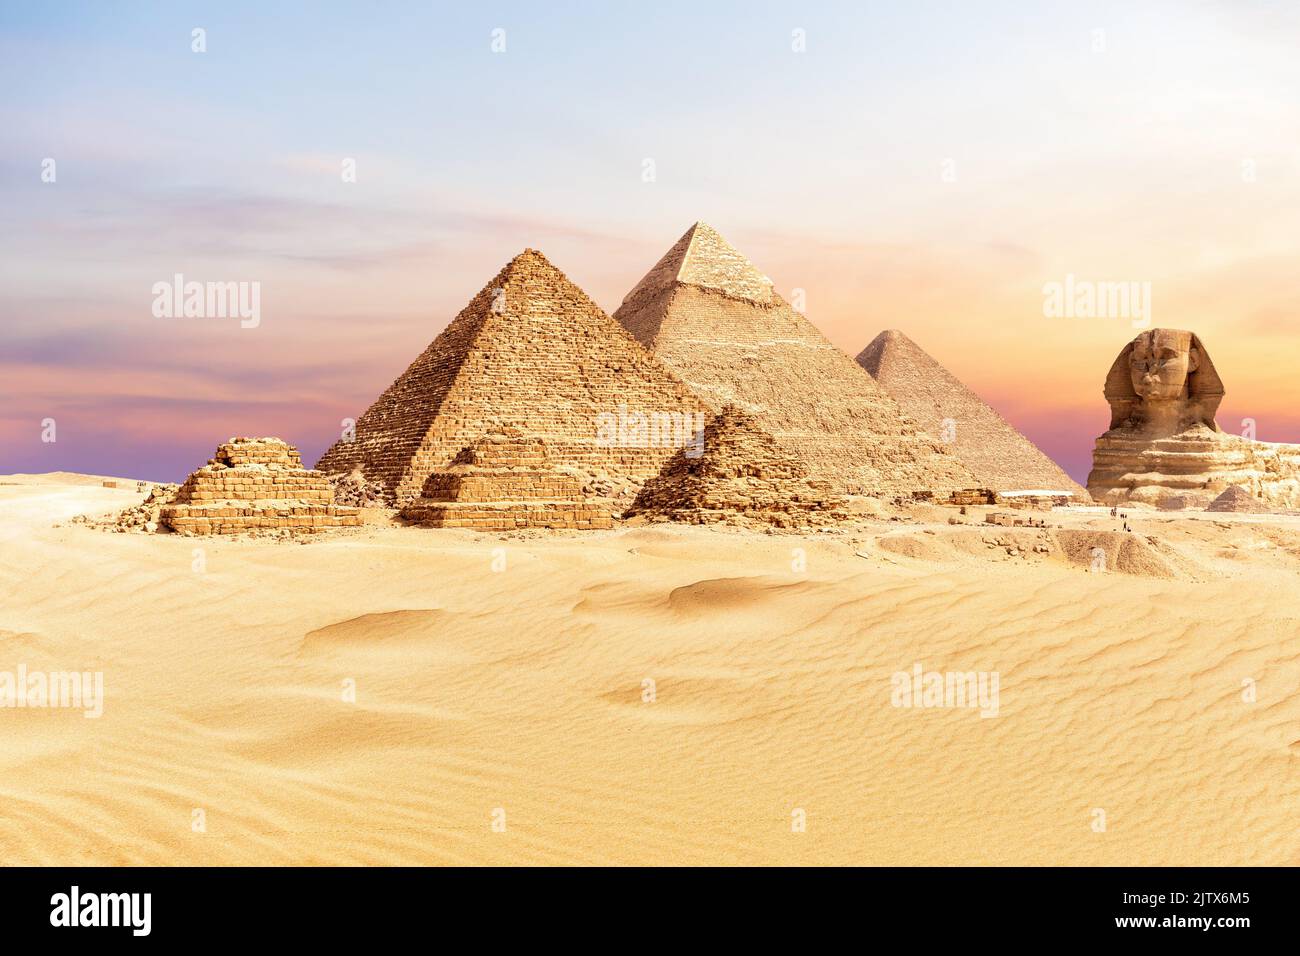 The Great Pyramid Complex in the Giza desert, Egypt. Stock Photo